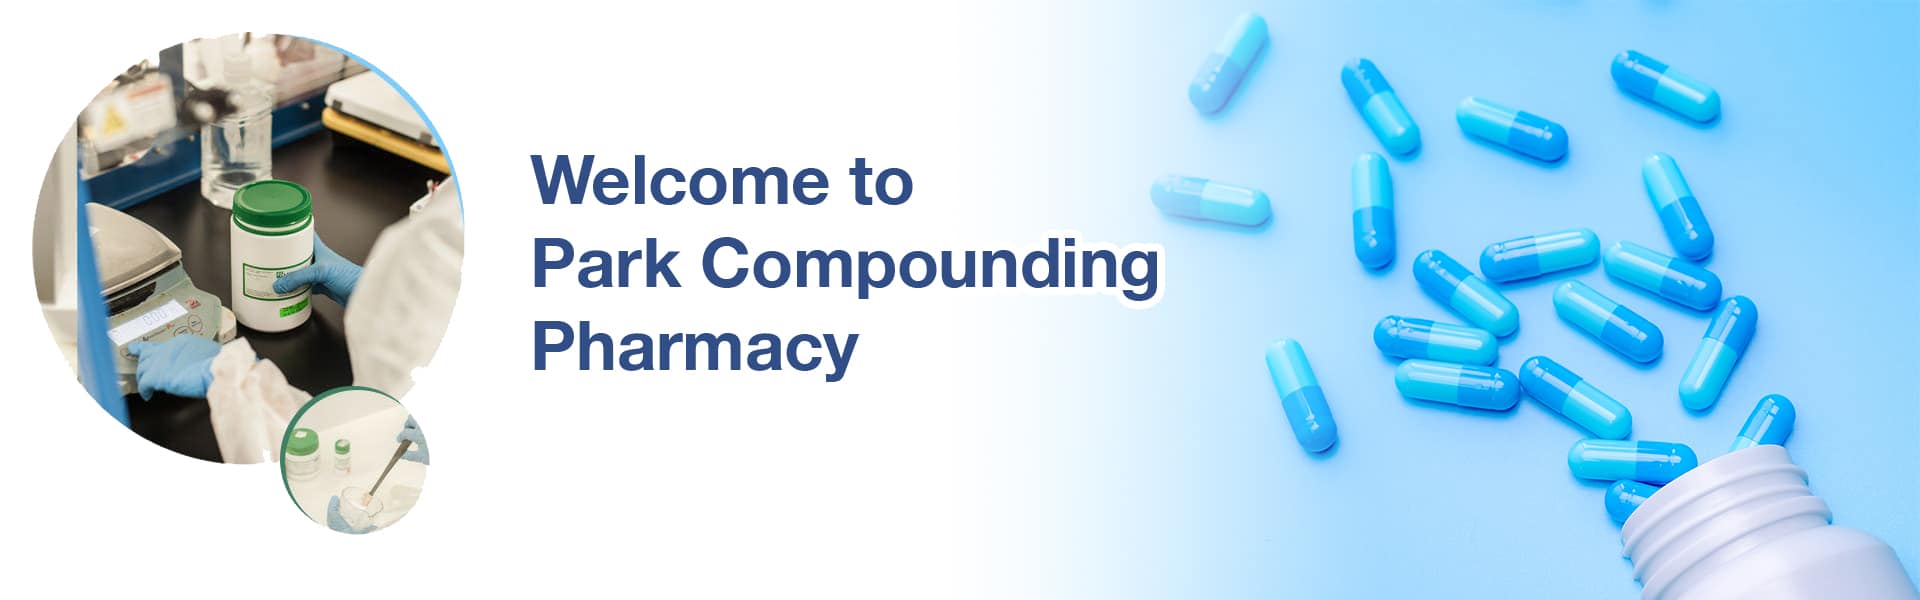 Welcome to Park Compounding Pharmacy – image of compounding at the pharmacy